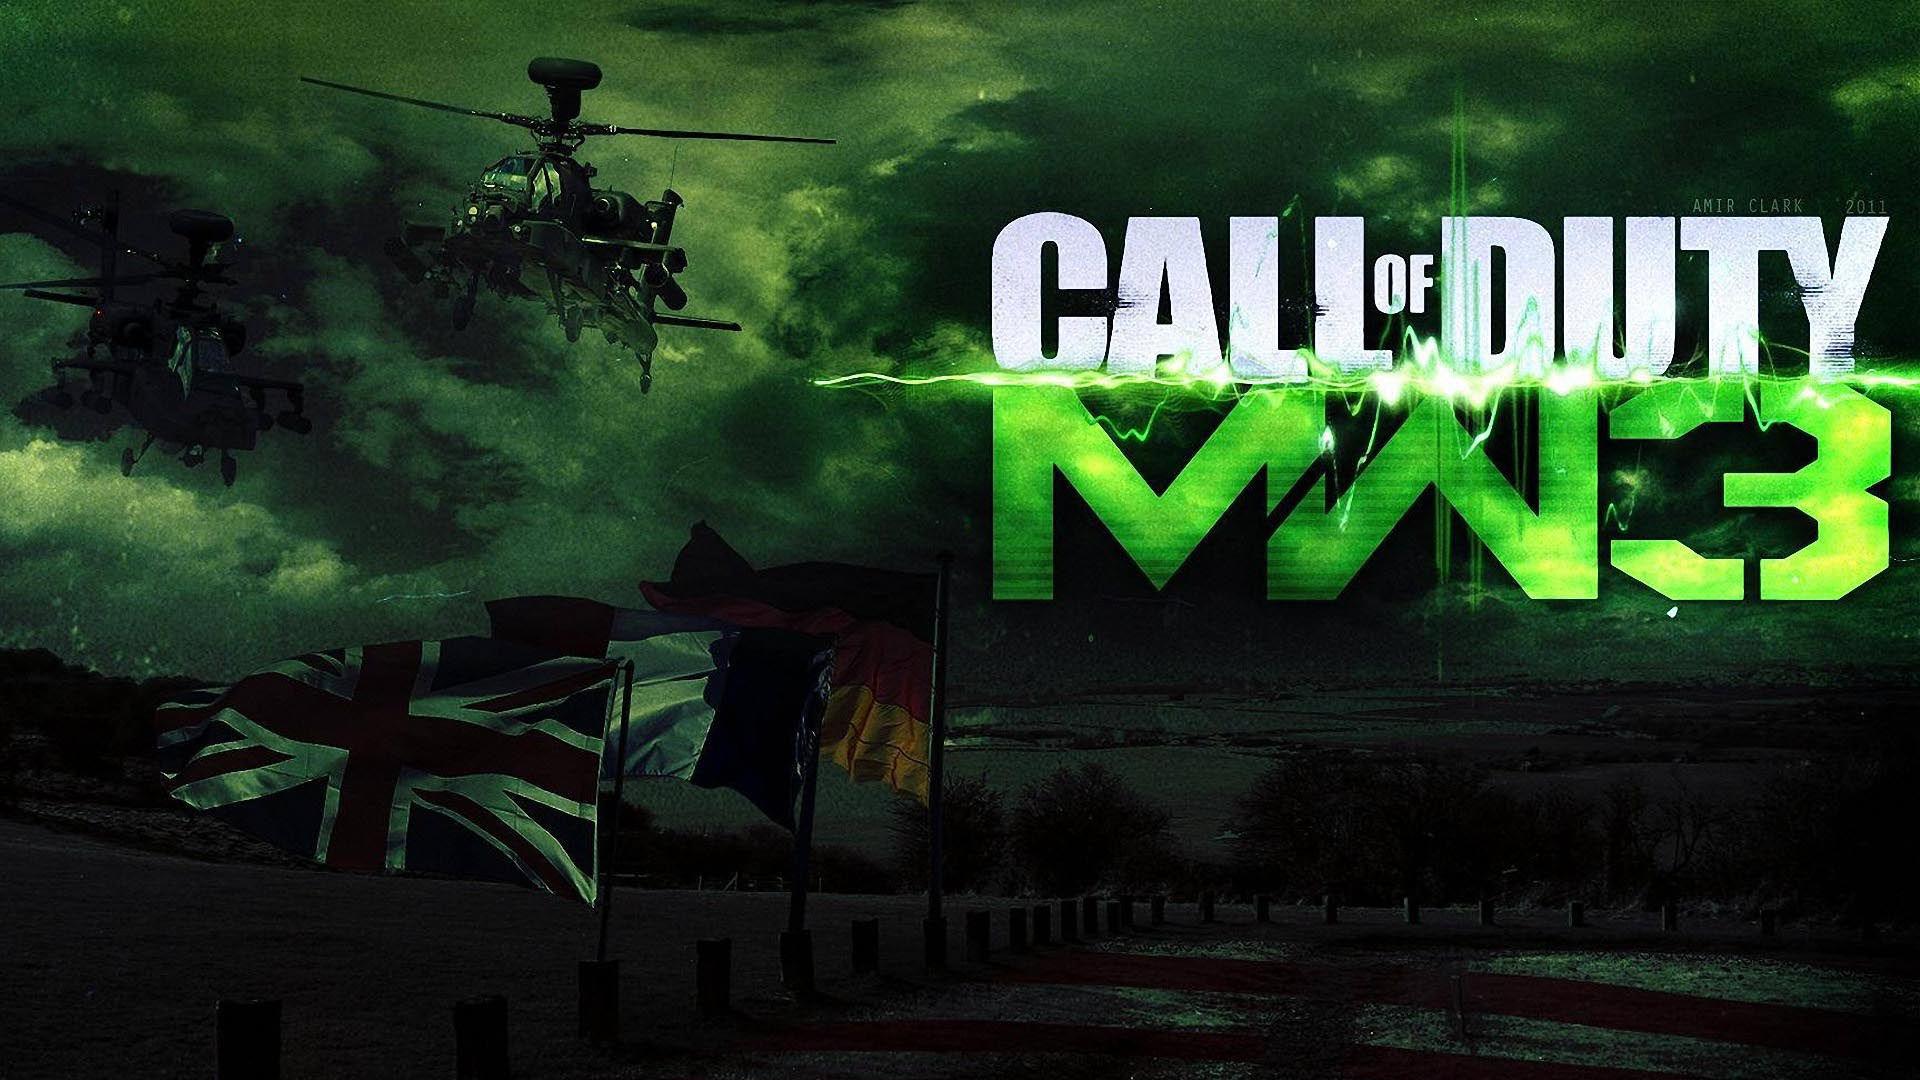 call of duty mw3 wallpaper hd 1080pCall Of Duty Wallpaper 1080p